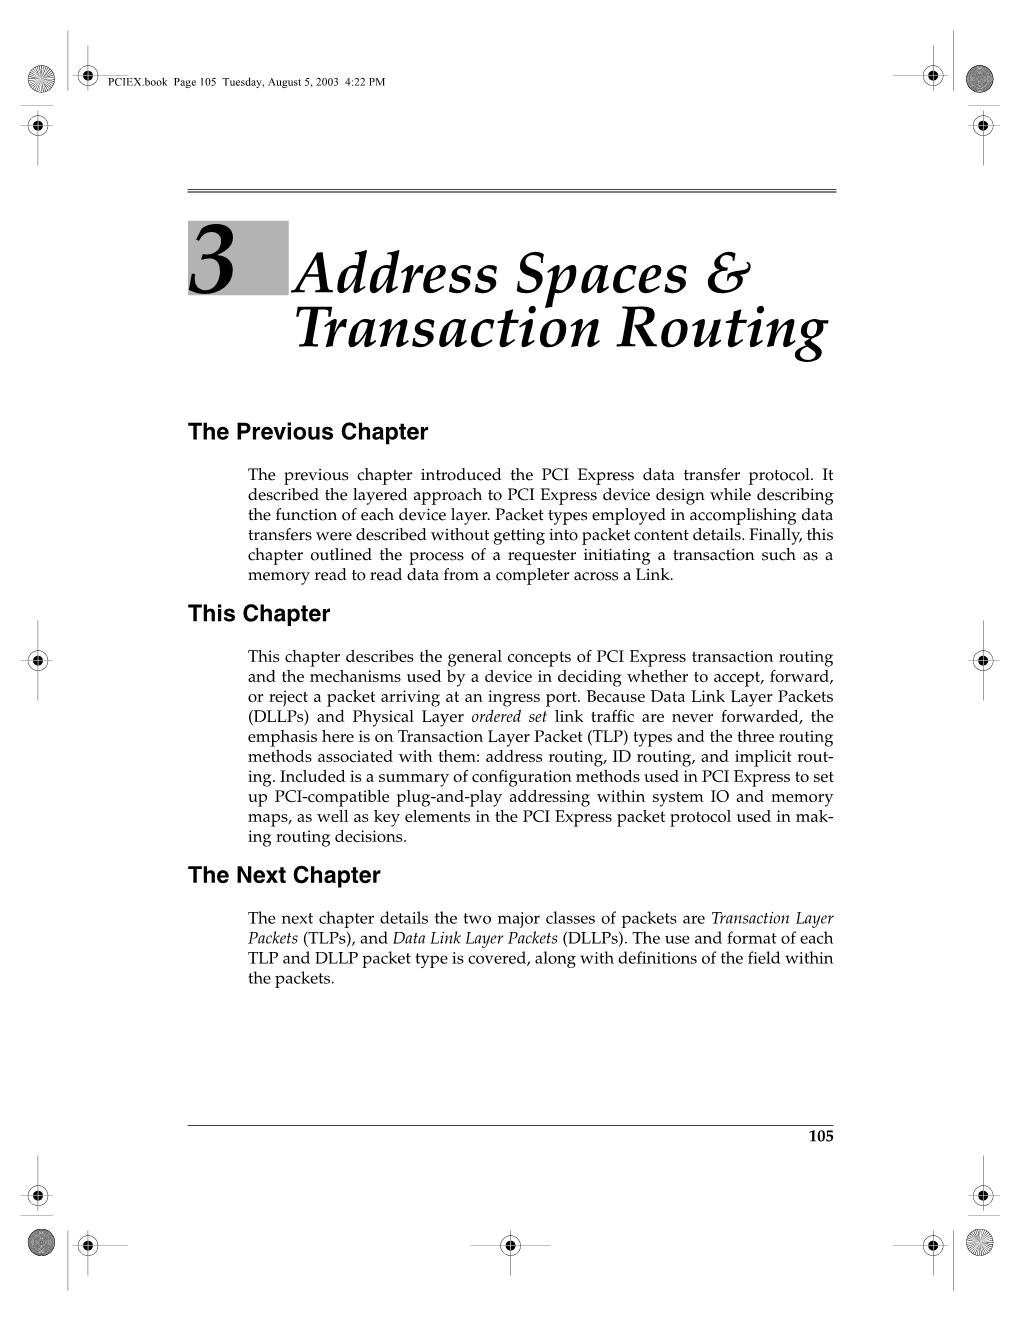 3 Address Spaces & Transaction Routing